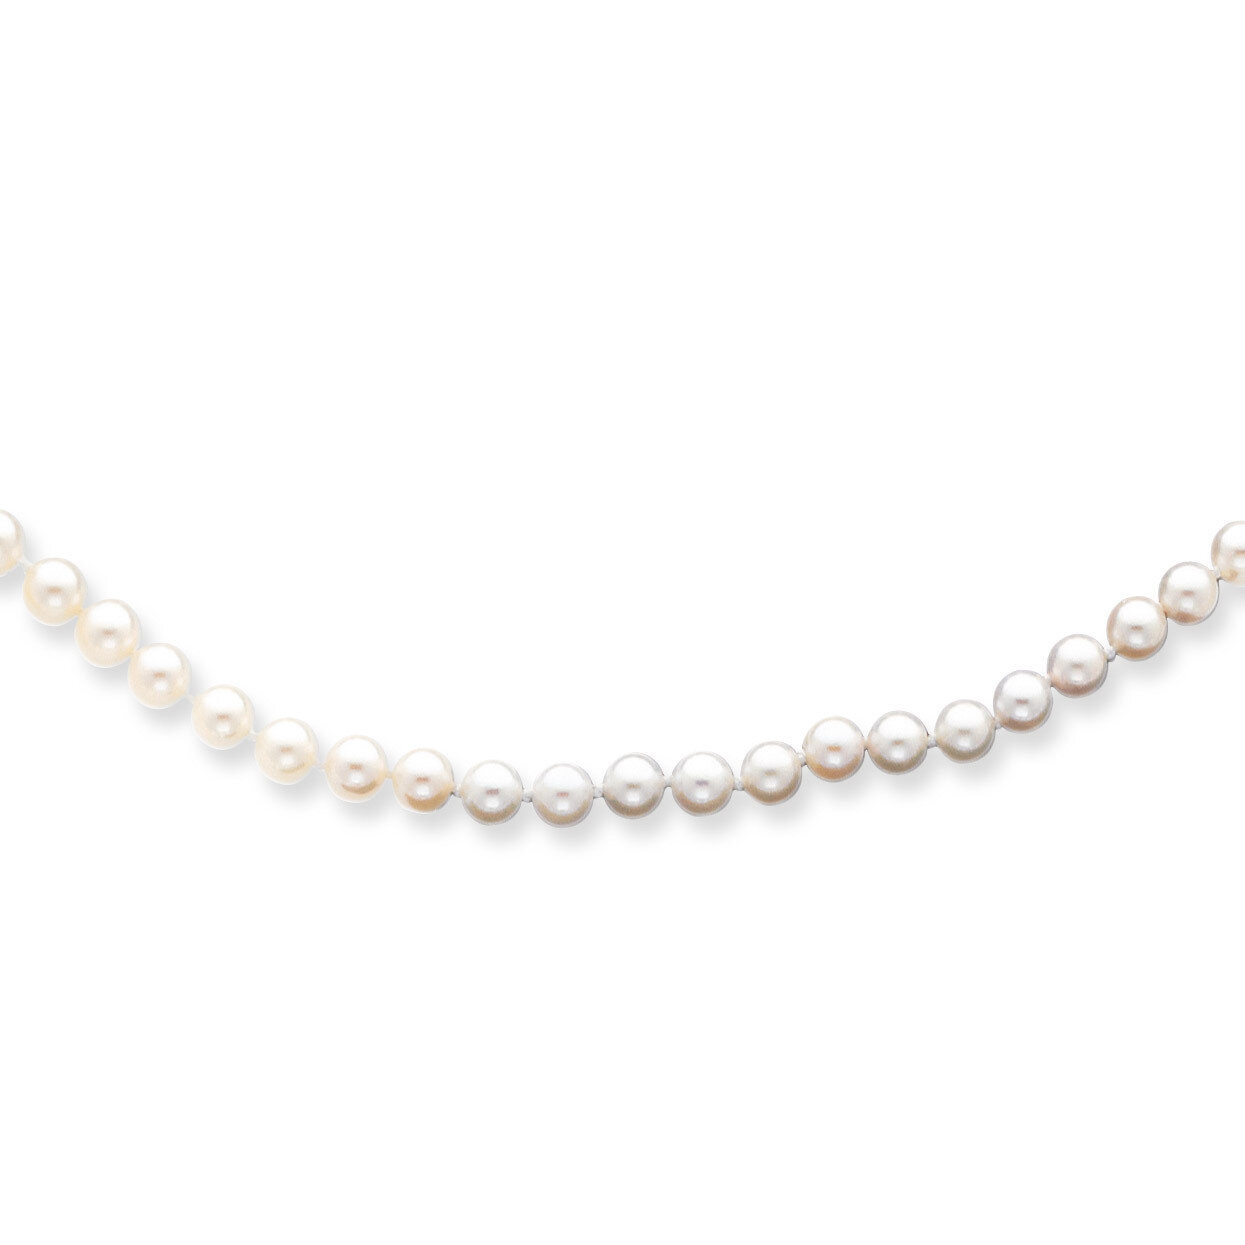 5-6mm Round White Saltwater Akoya Cultured Pearl Necklace 18 Inch 14k Gold PL50A-18